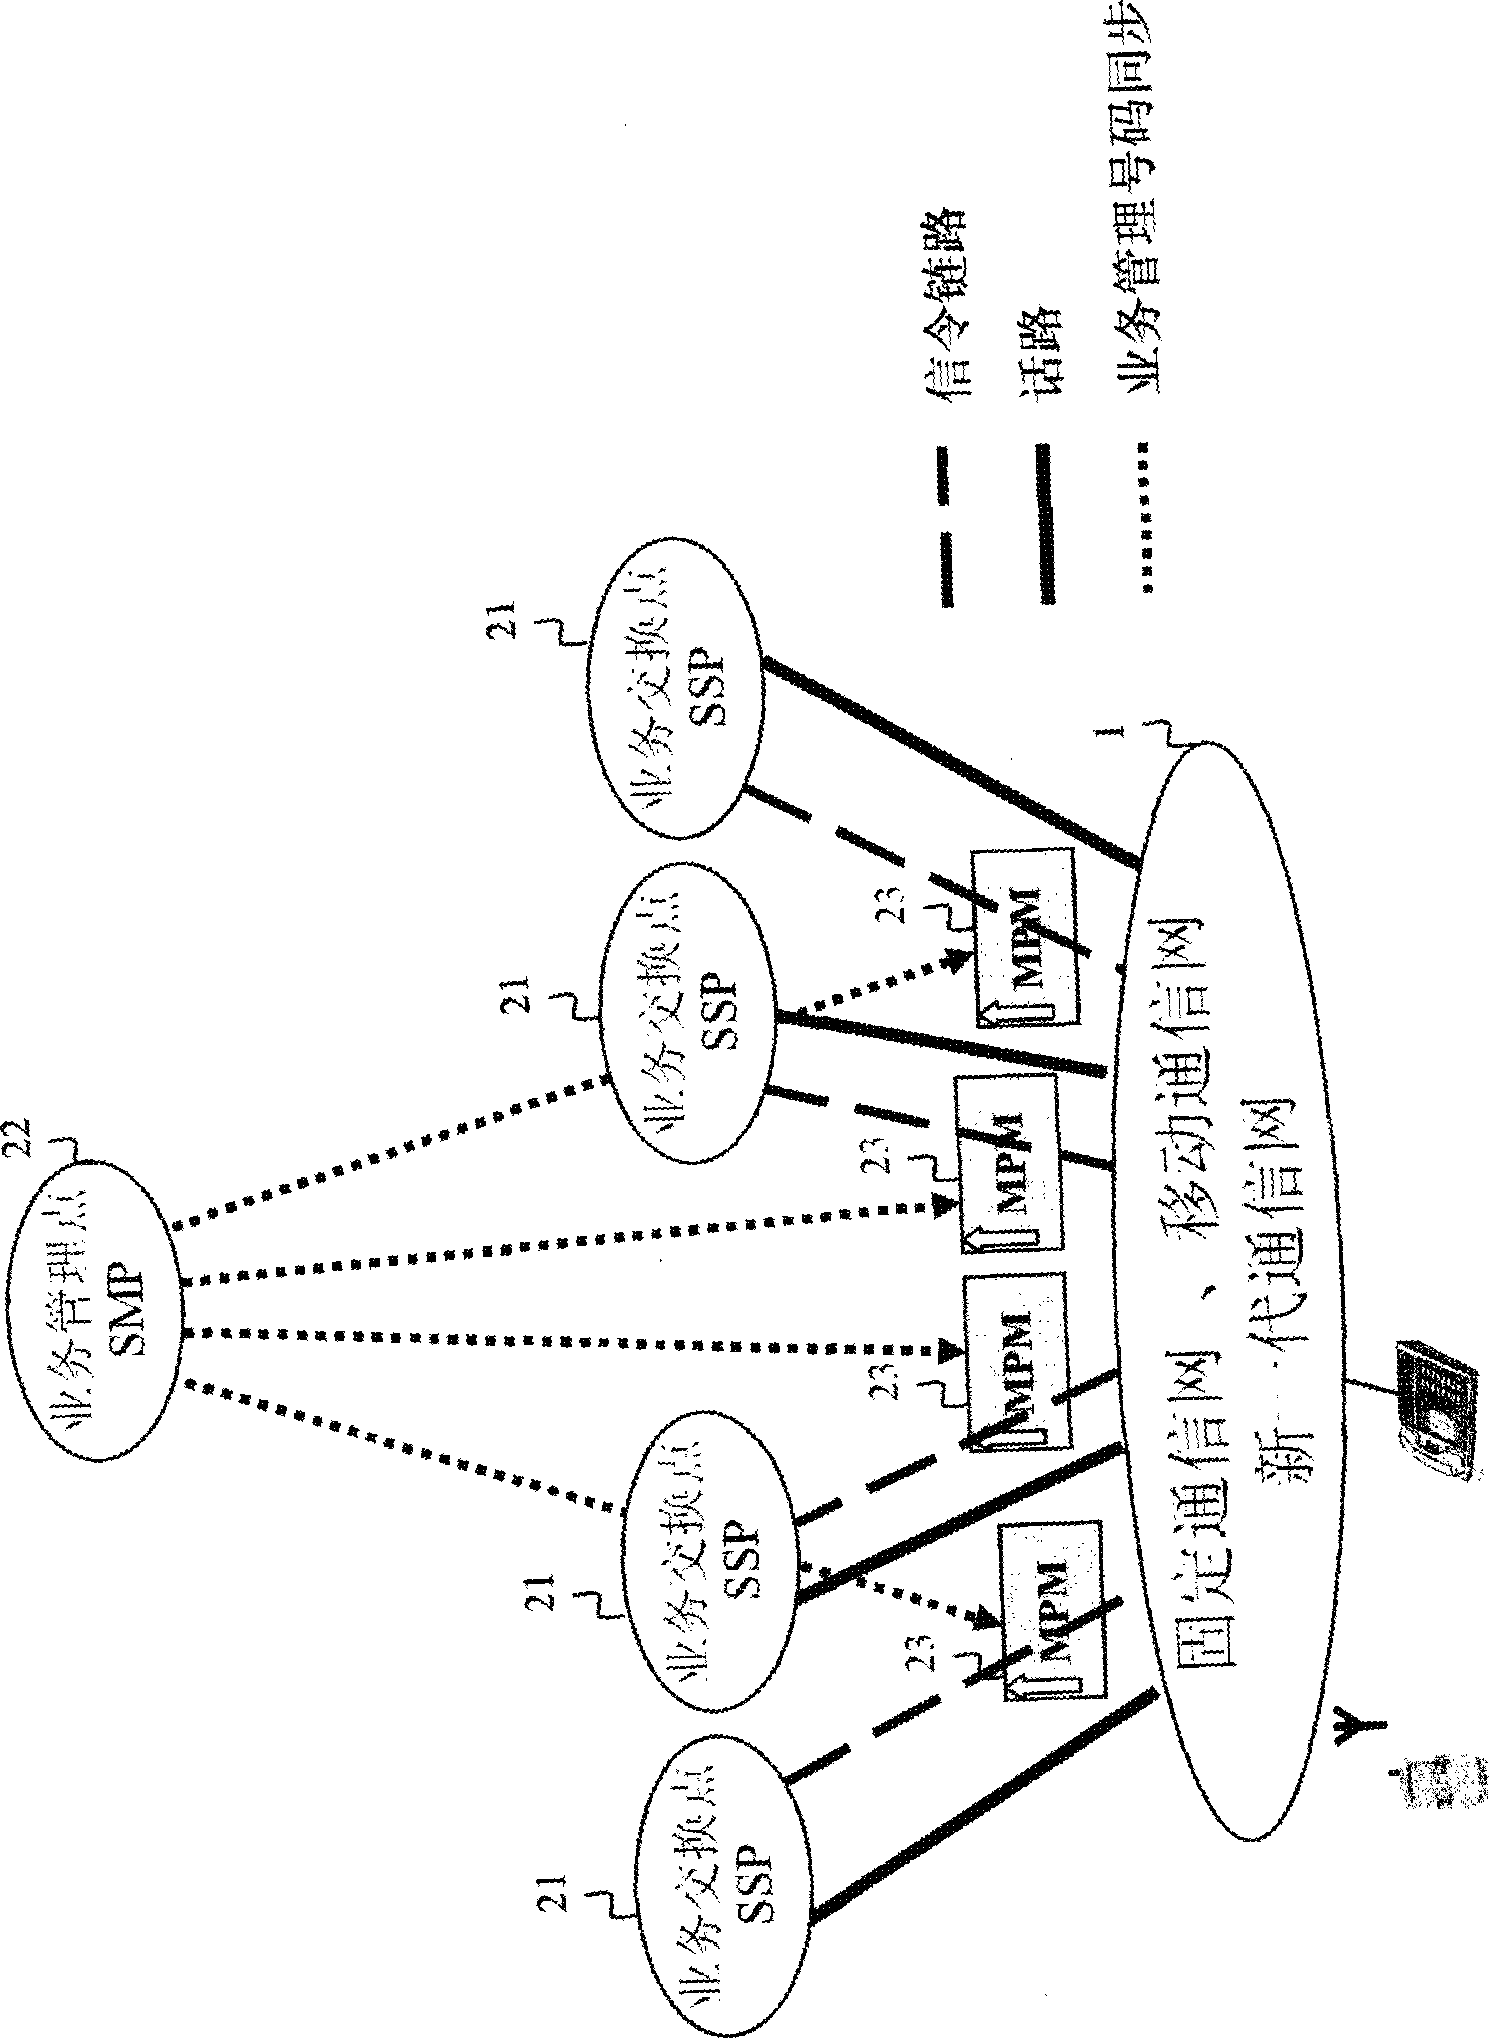 Method for implementing prepositive logic personalized telecom value added business